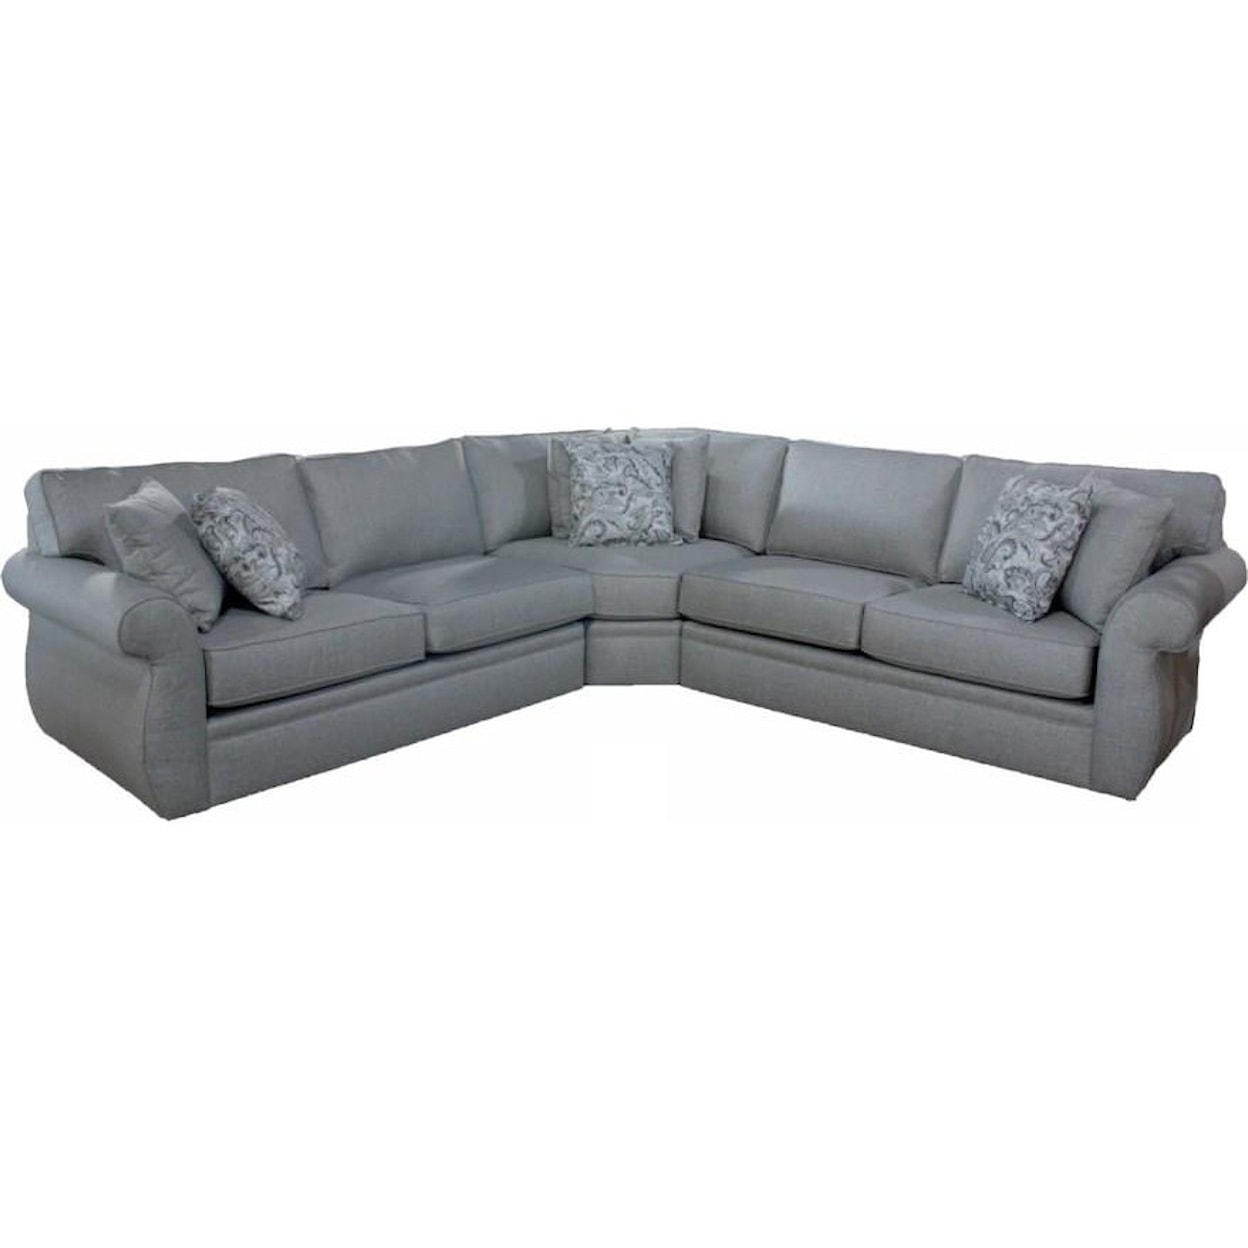 Stone & Leigh Furniture Veronica SECTIONAL WITH ROLL ARMS